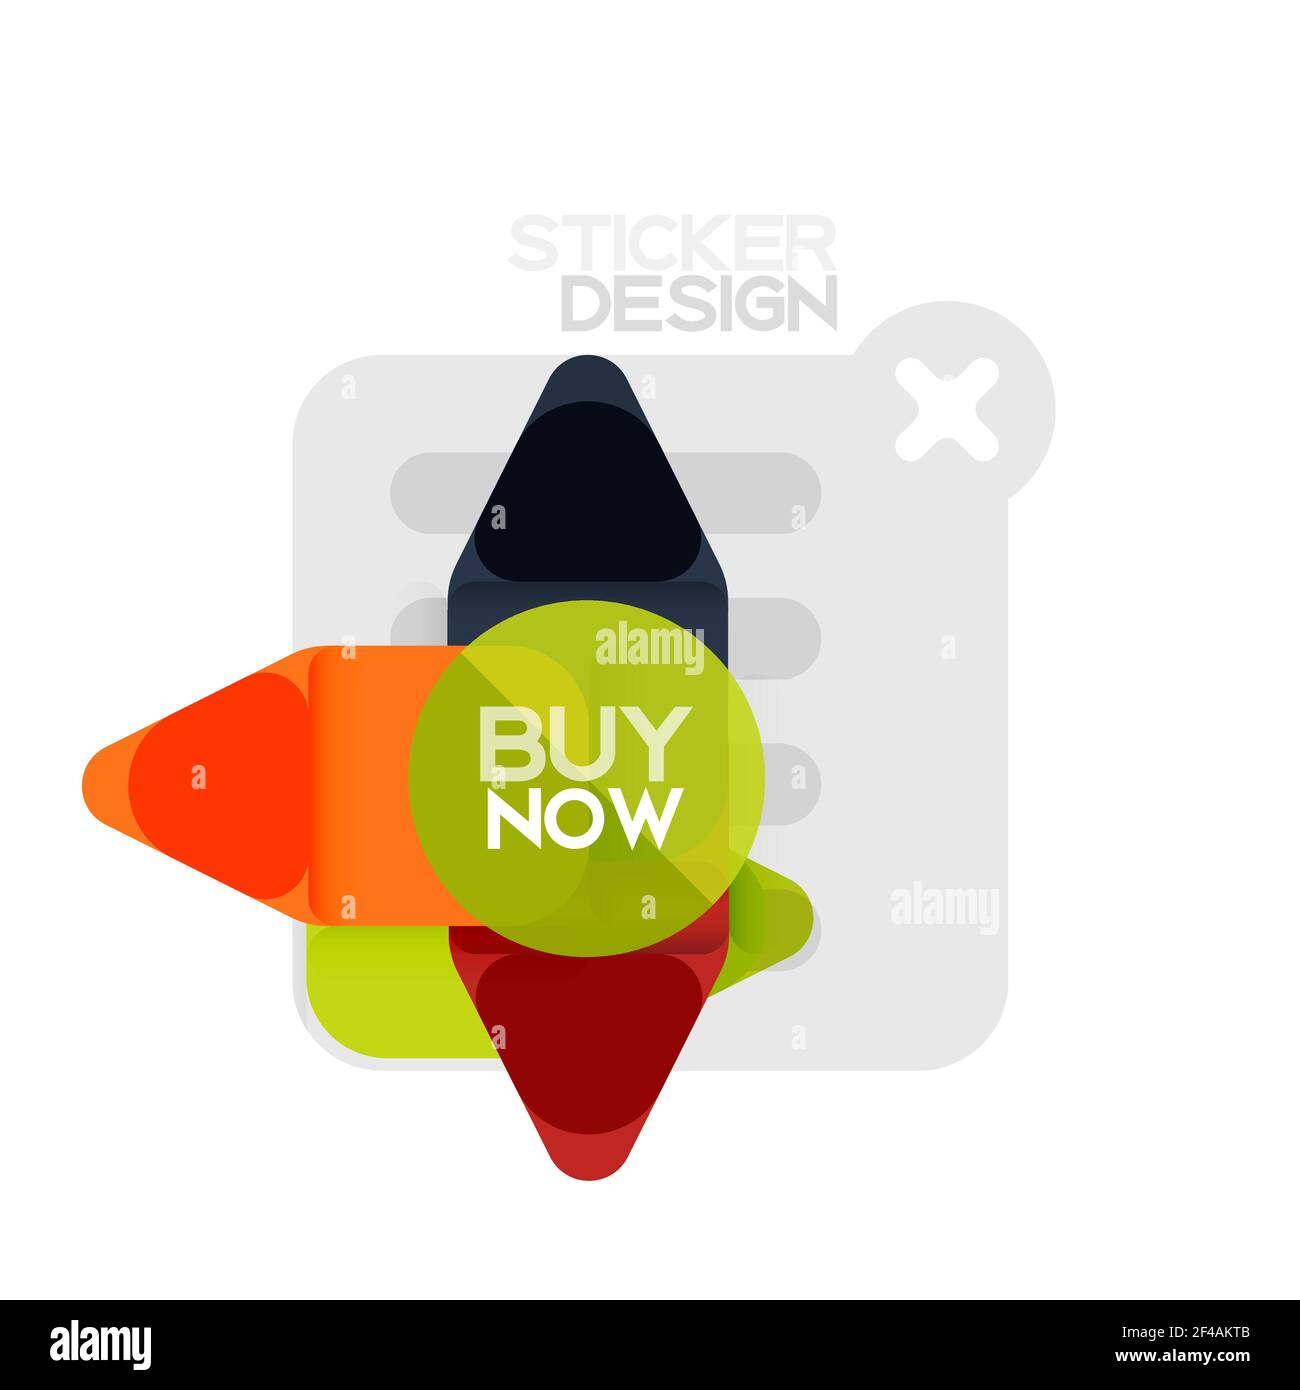 Flat design triangle arrow shape geometric sticker icon, paper style design with buy now sample text, for business or web presentation, app or interface buttons, internet website store banners. Flat design triangle arrow shape geometric sticker icon, paper style design with buy now sample text, for business or web presentation, app or interface buttons, internet website store banners and labels Stock Vector